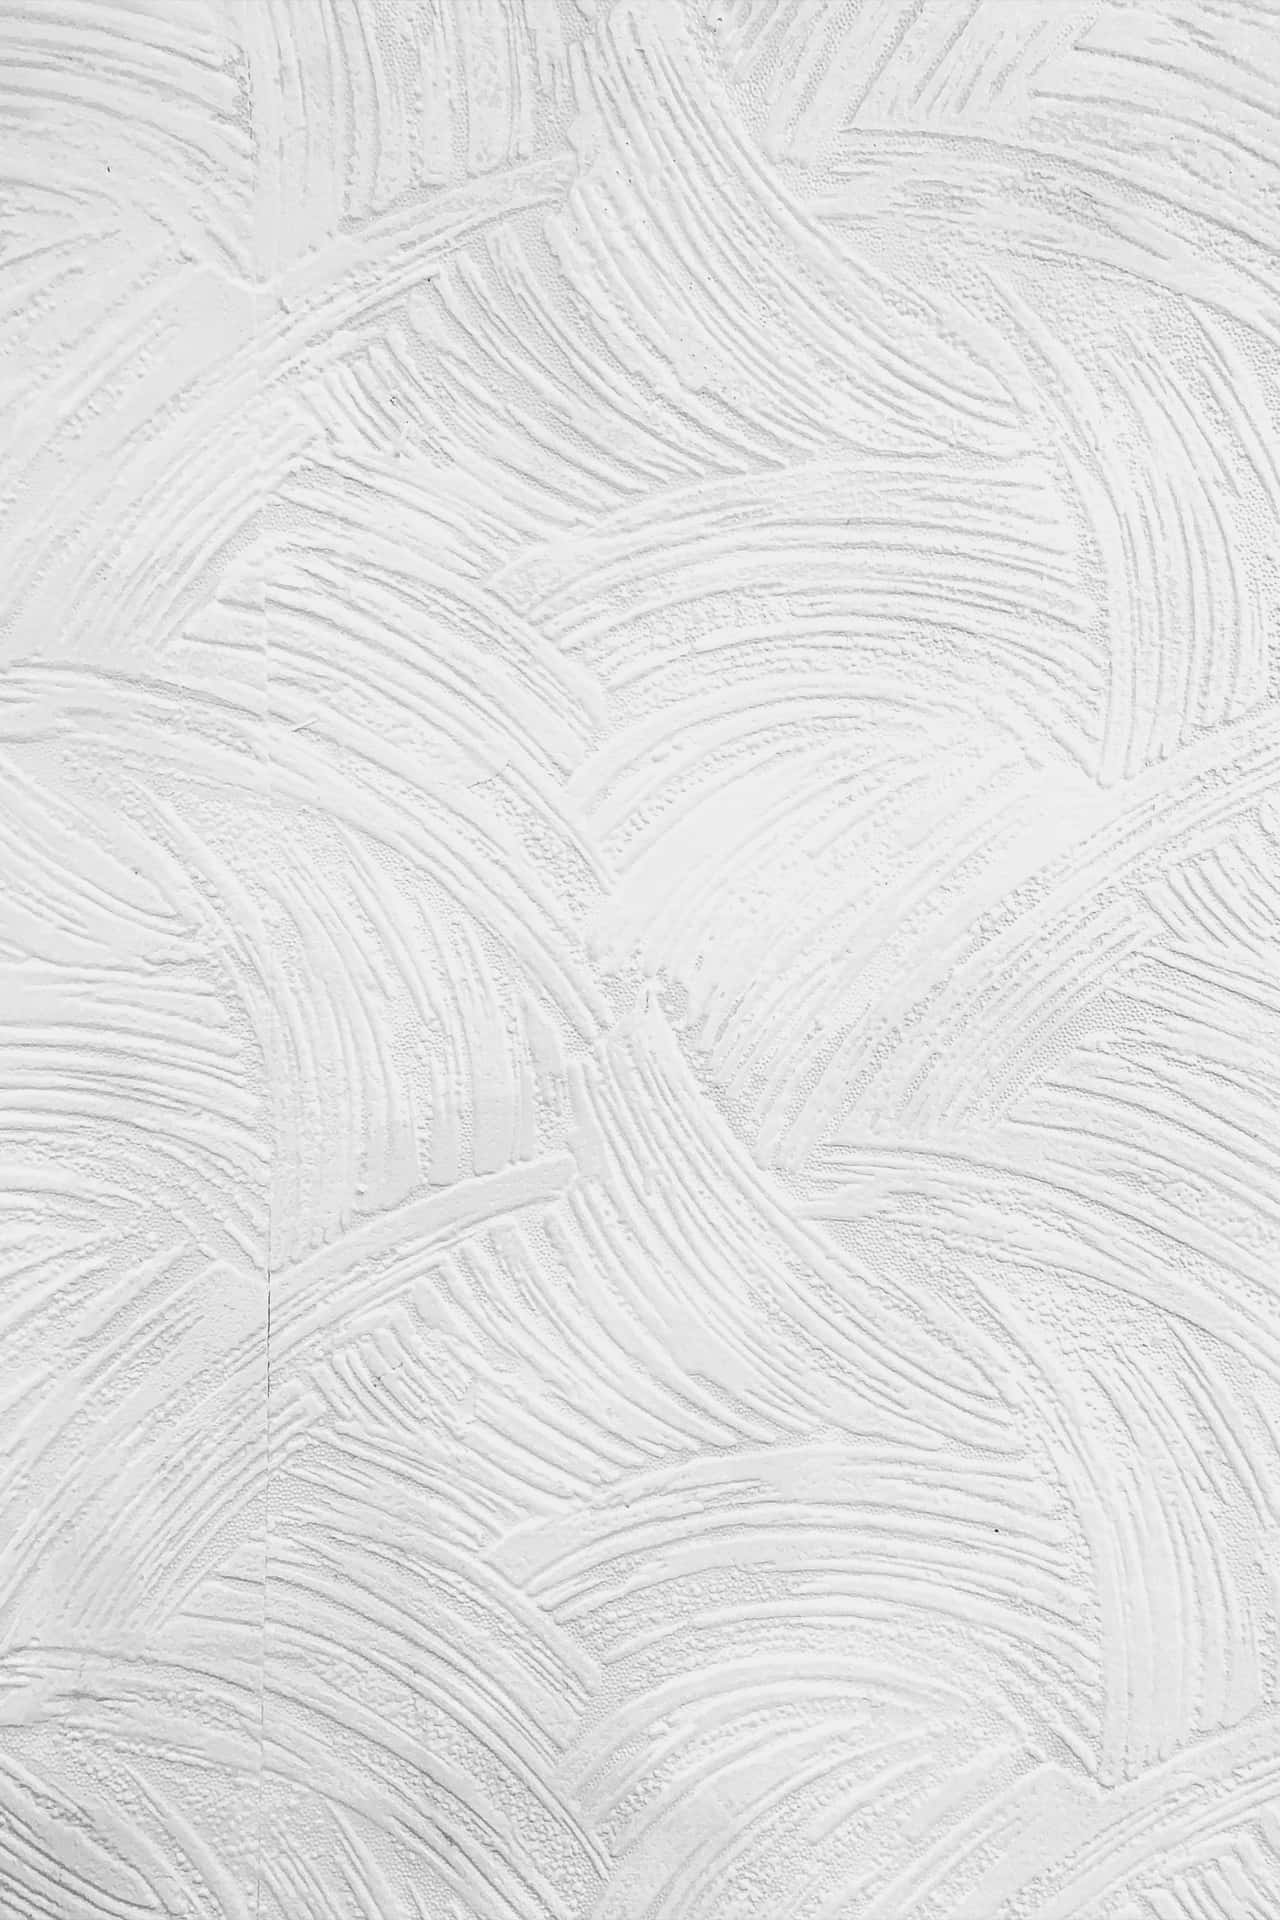 White Wall Background With Curved Line Patterns